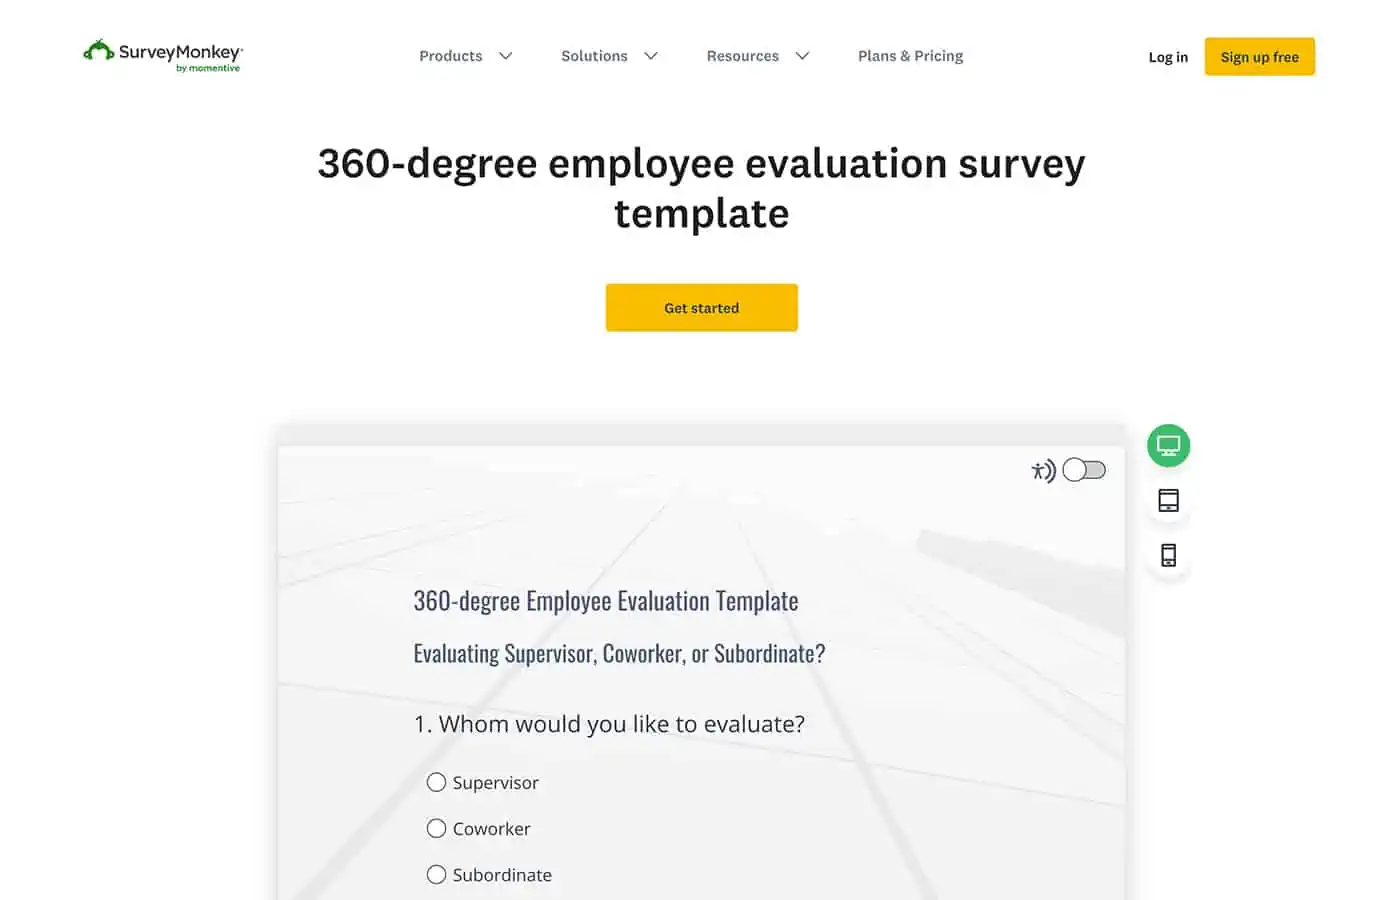 An image showing an example of a survey from SurveyMonkey